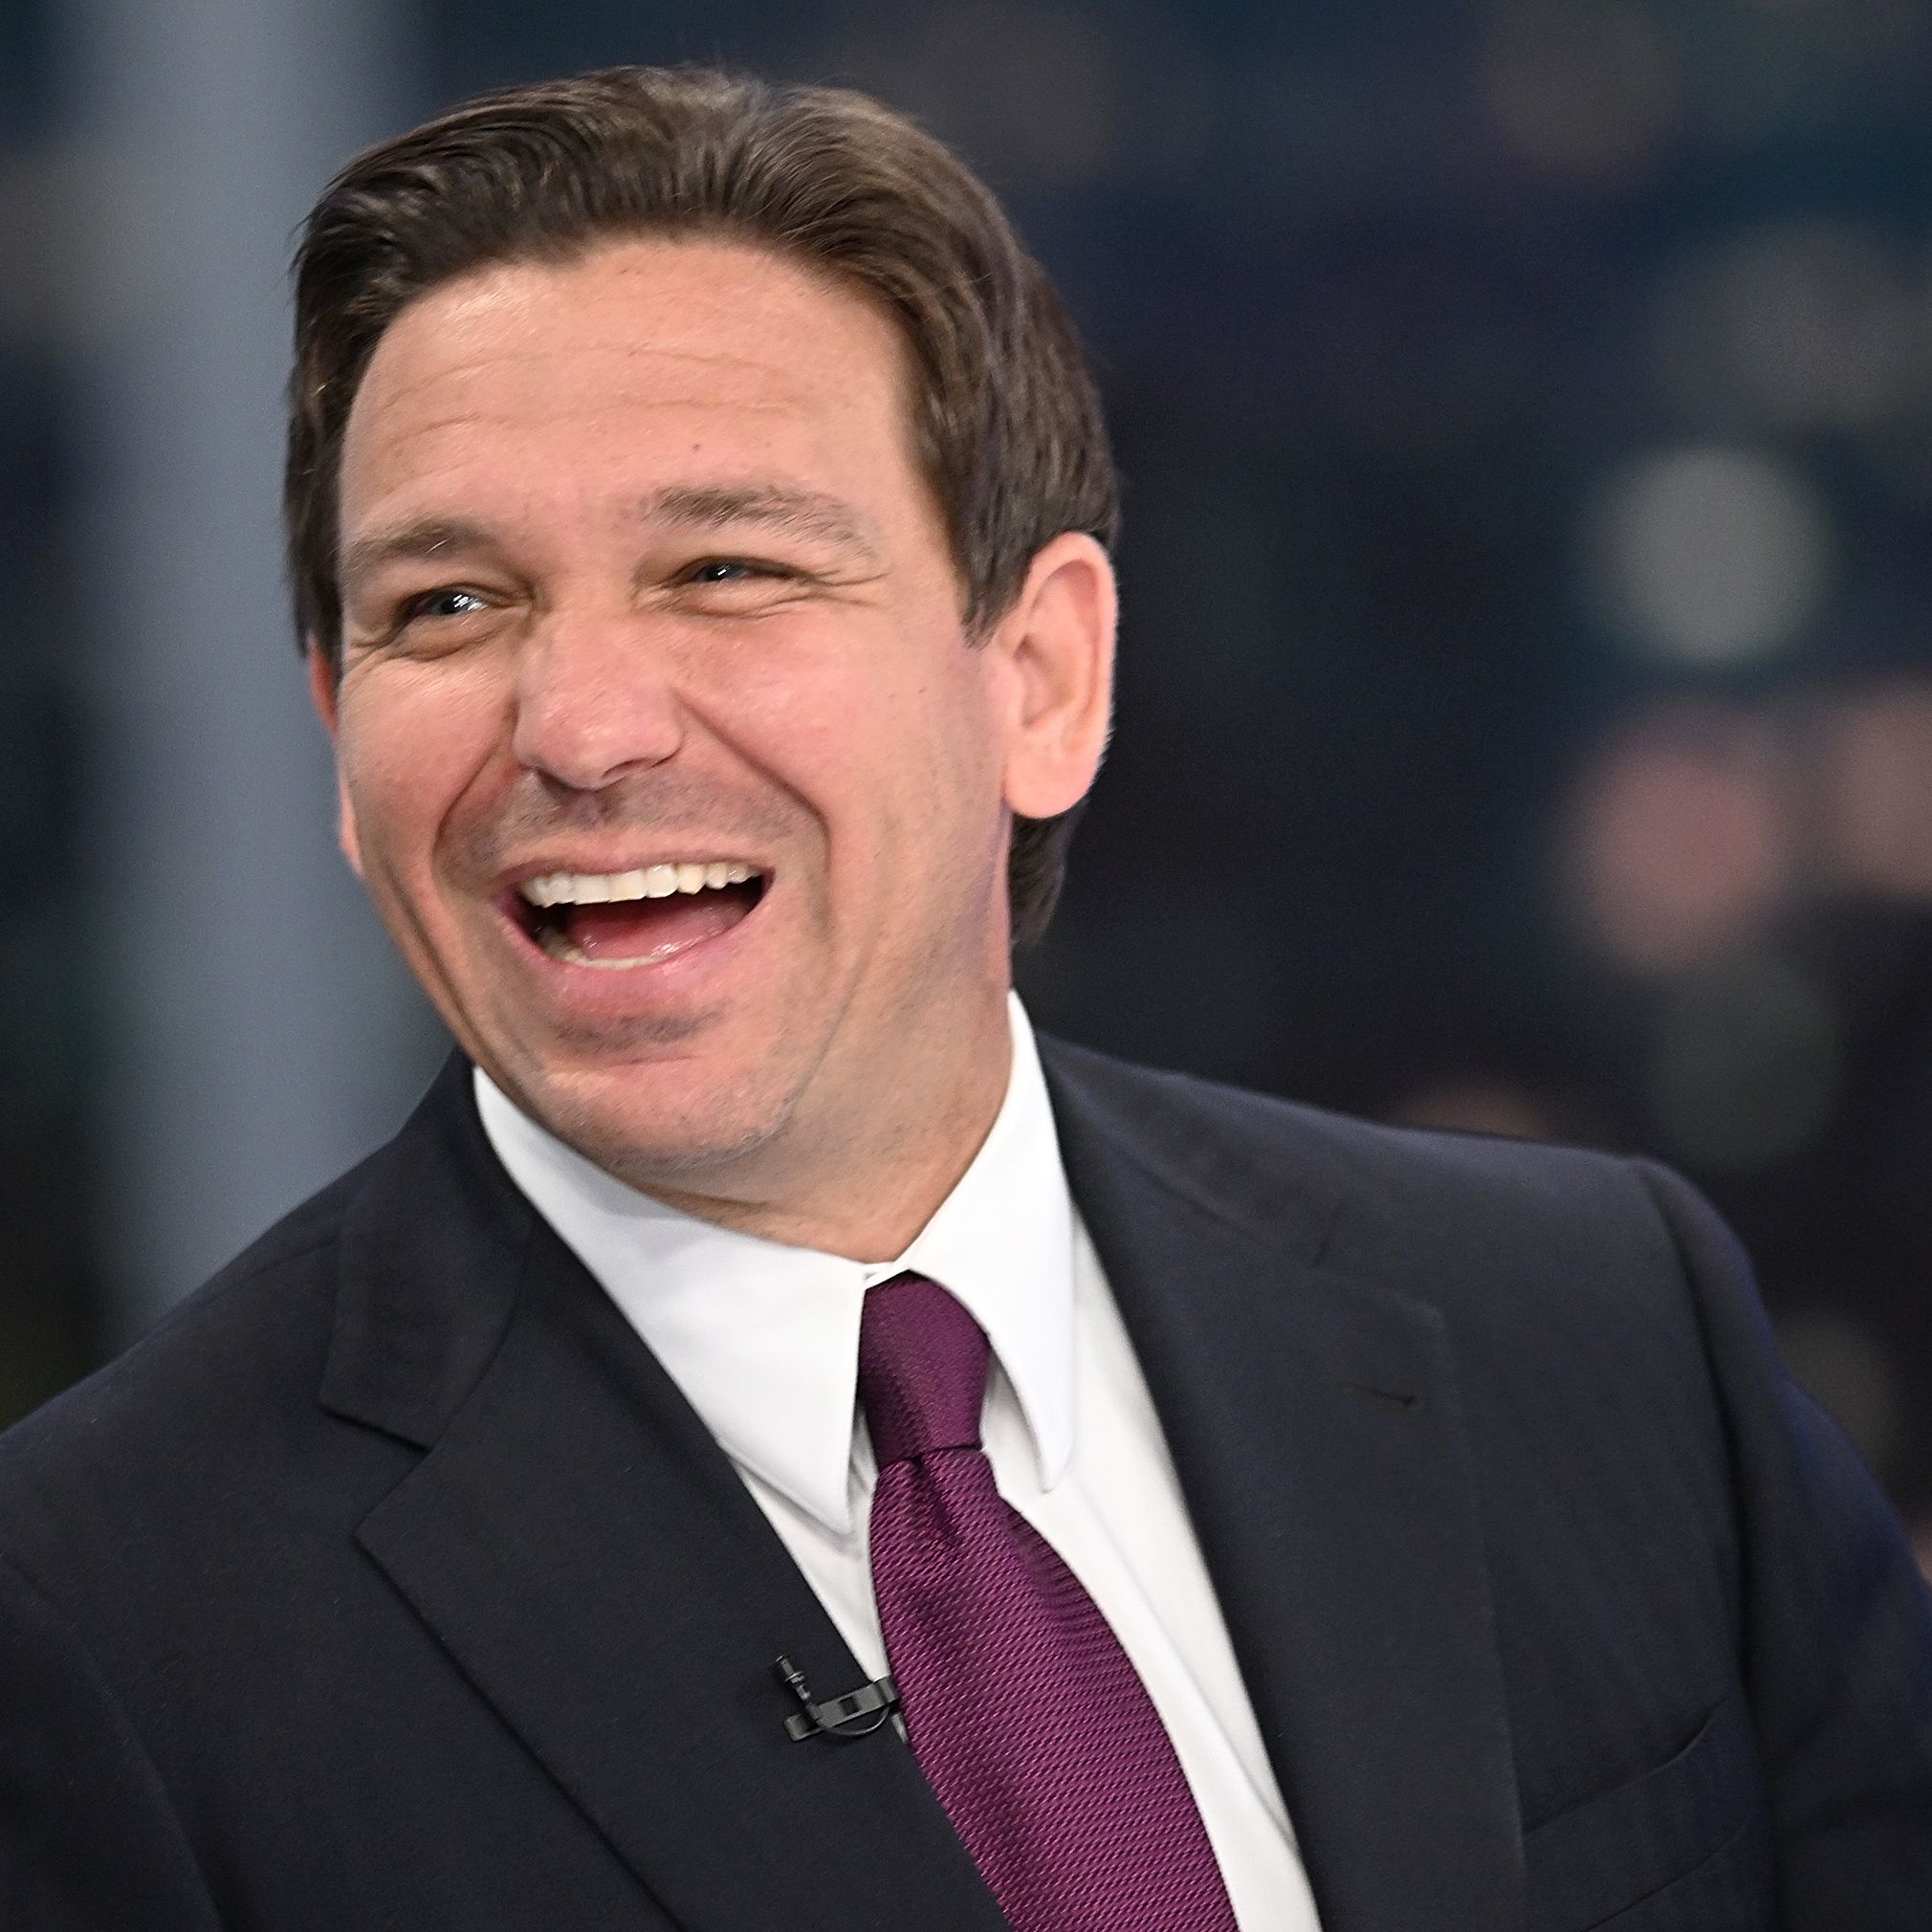 Ron DeSantis Is Making a Magnificent Effort to Protect Voters from Health